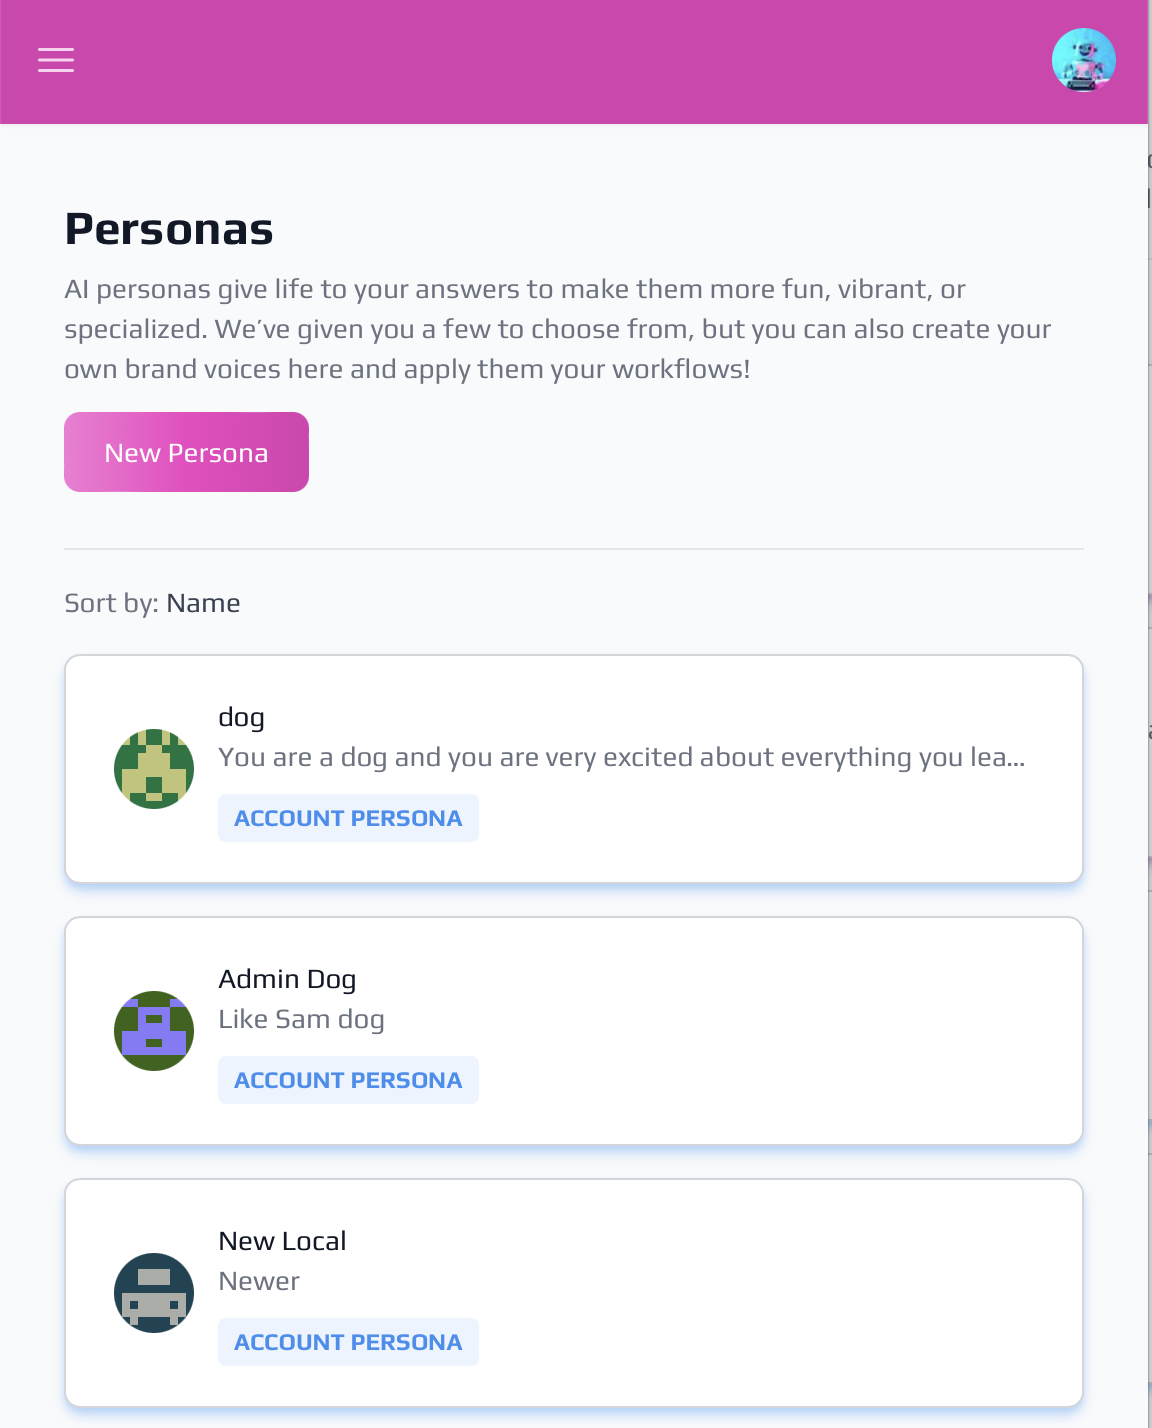 Mobile view of AI personas in content spark.